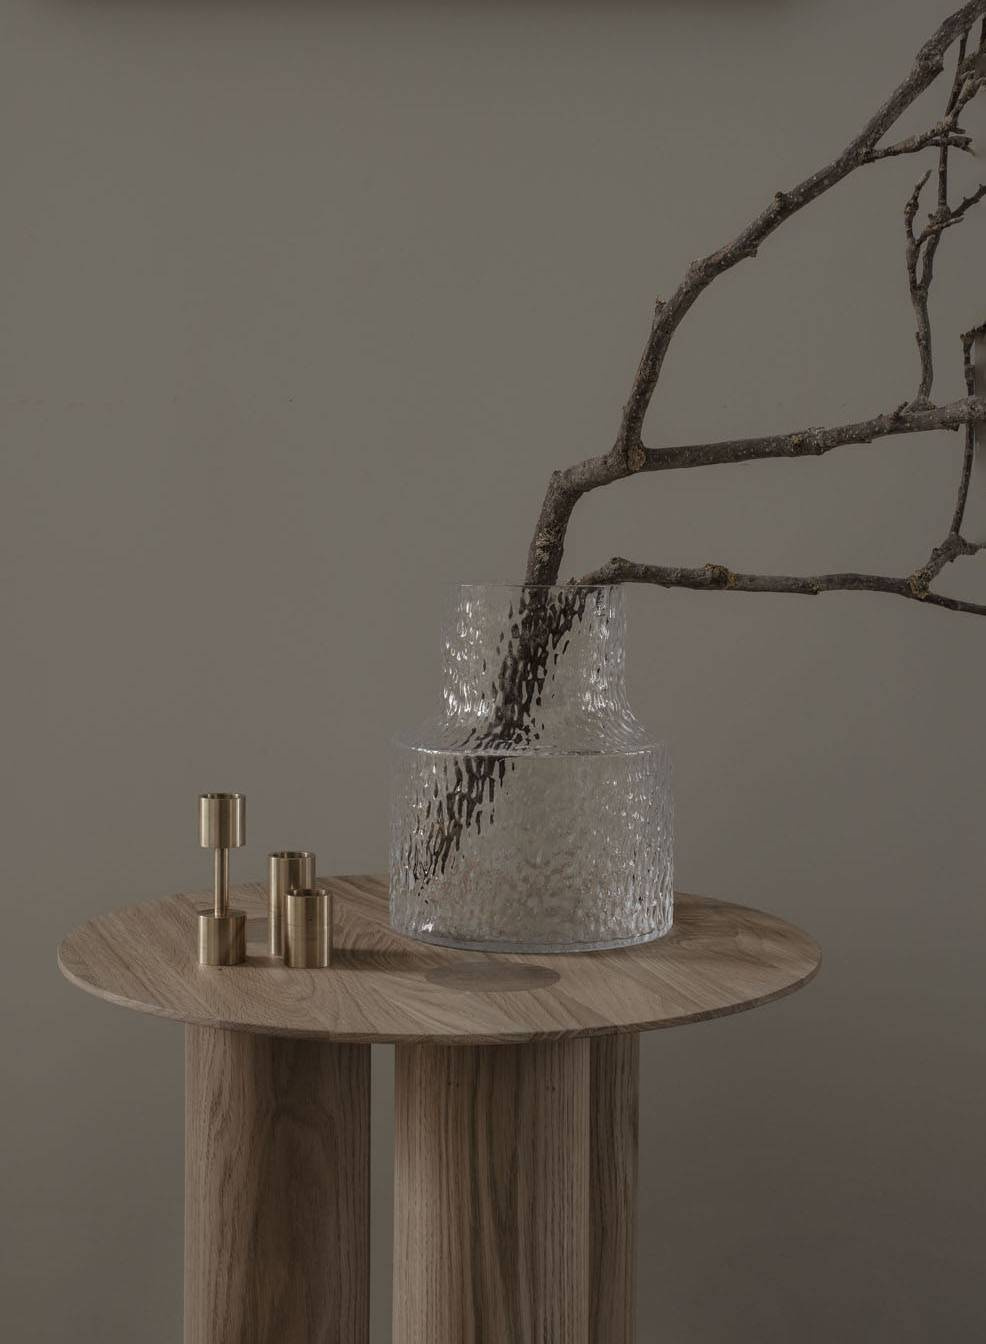 Hommage Side Table